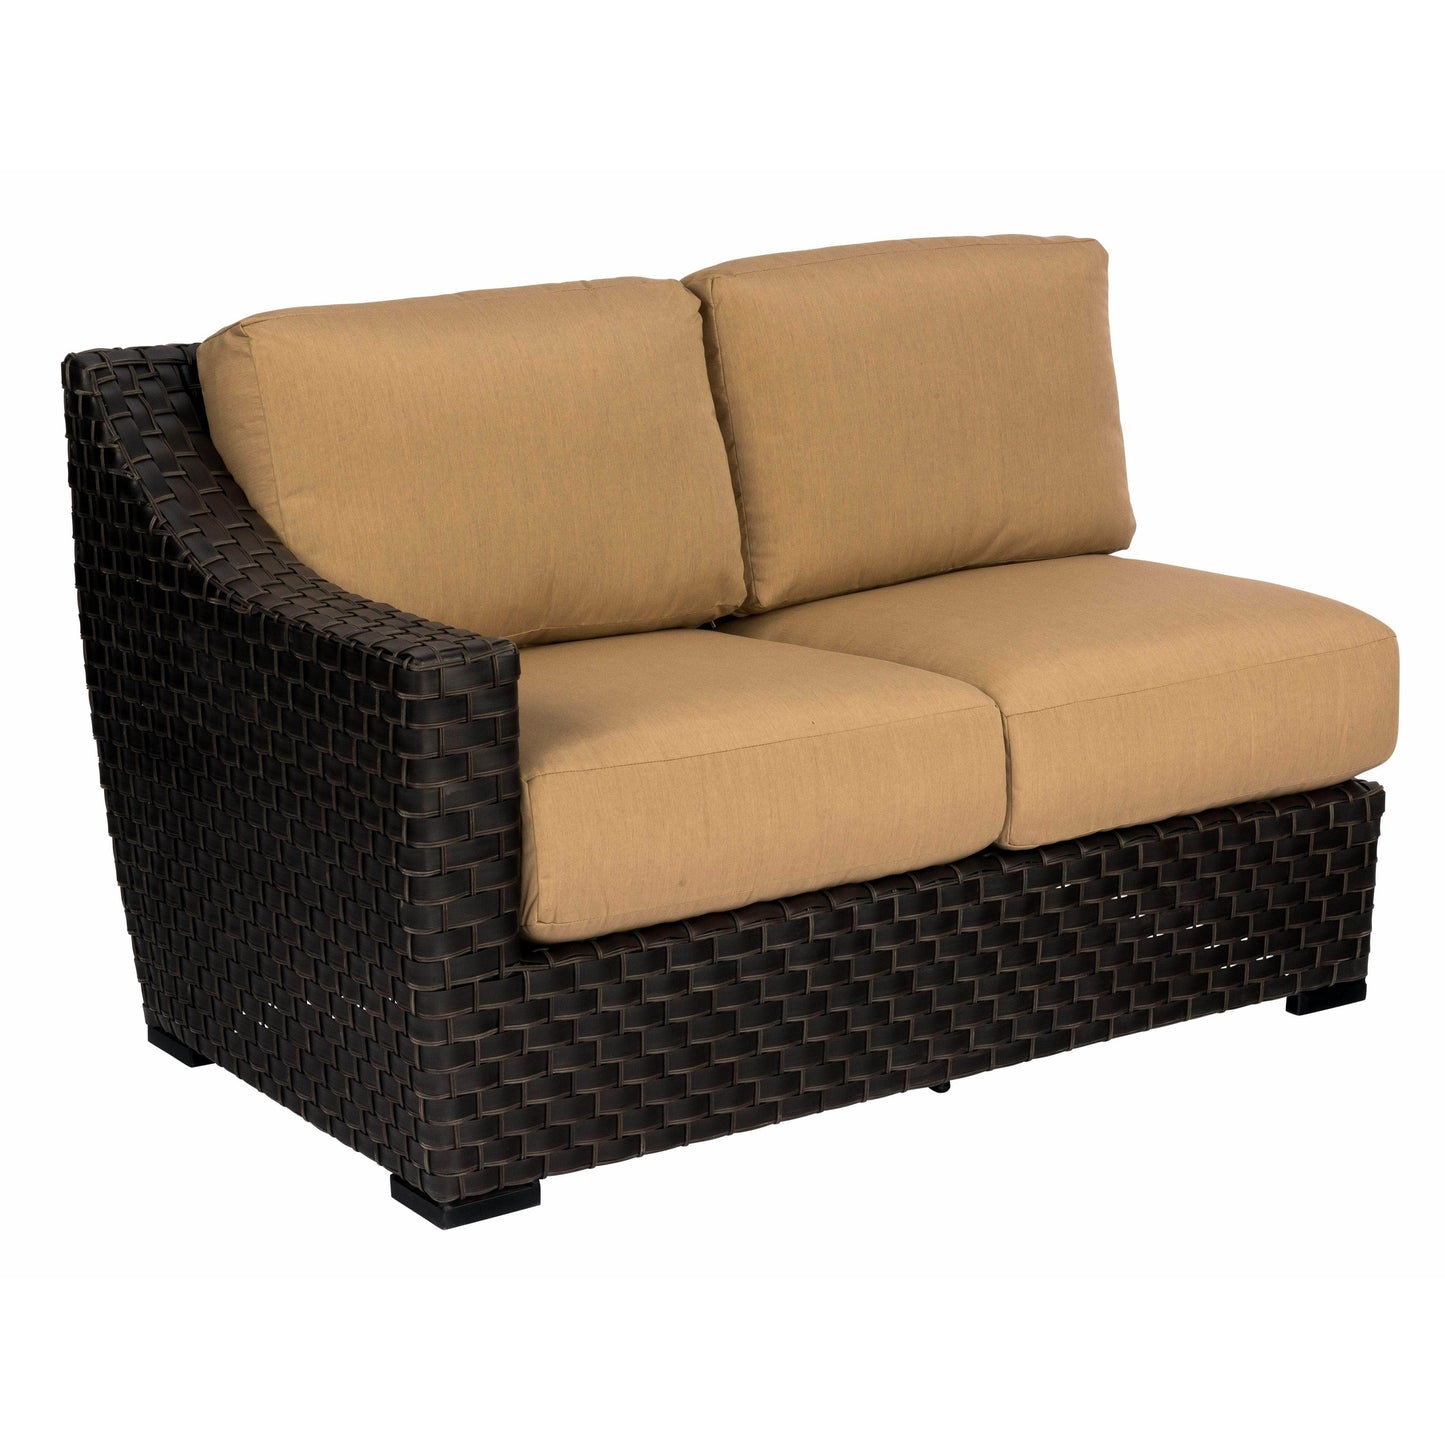 RAF Love Seat Sectional Unit S640031R Woodard Outdoor Patio | Cooper Collection Seating Woodard 